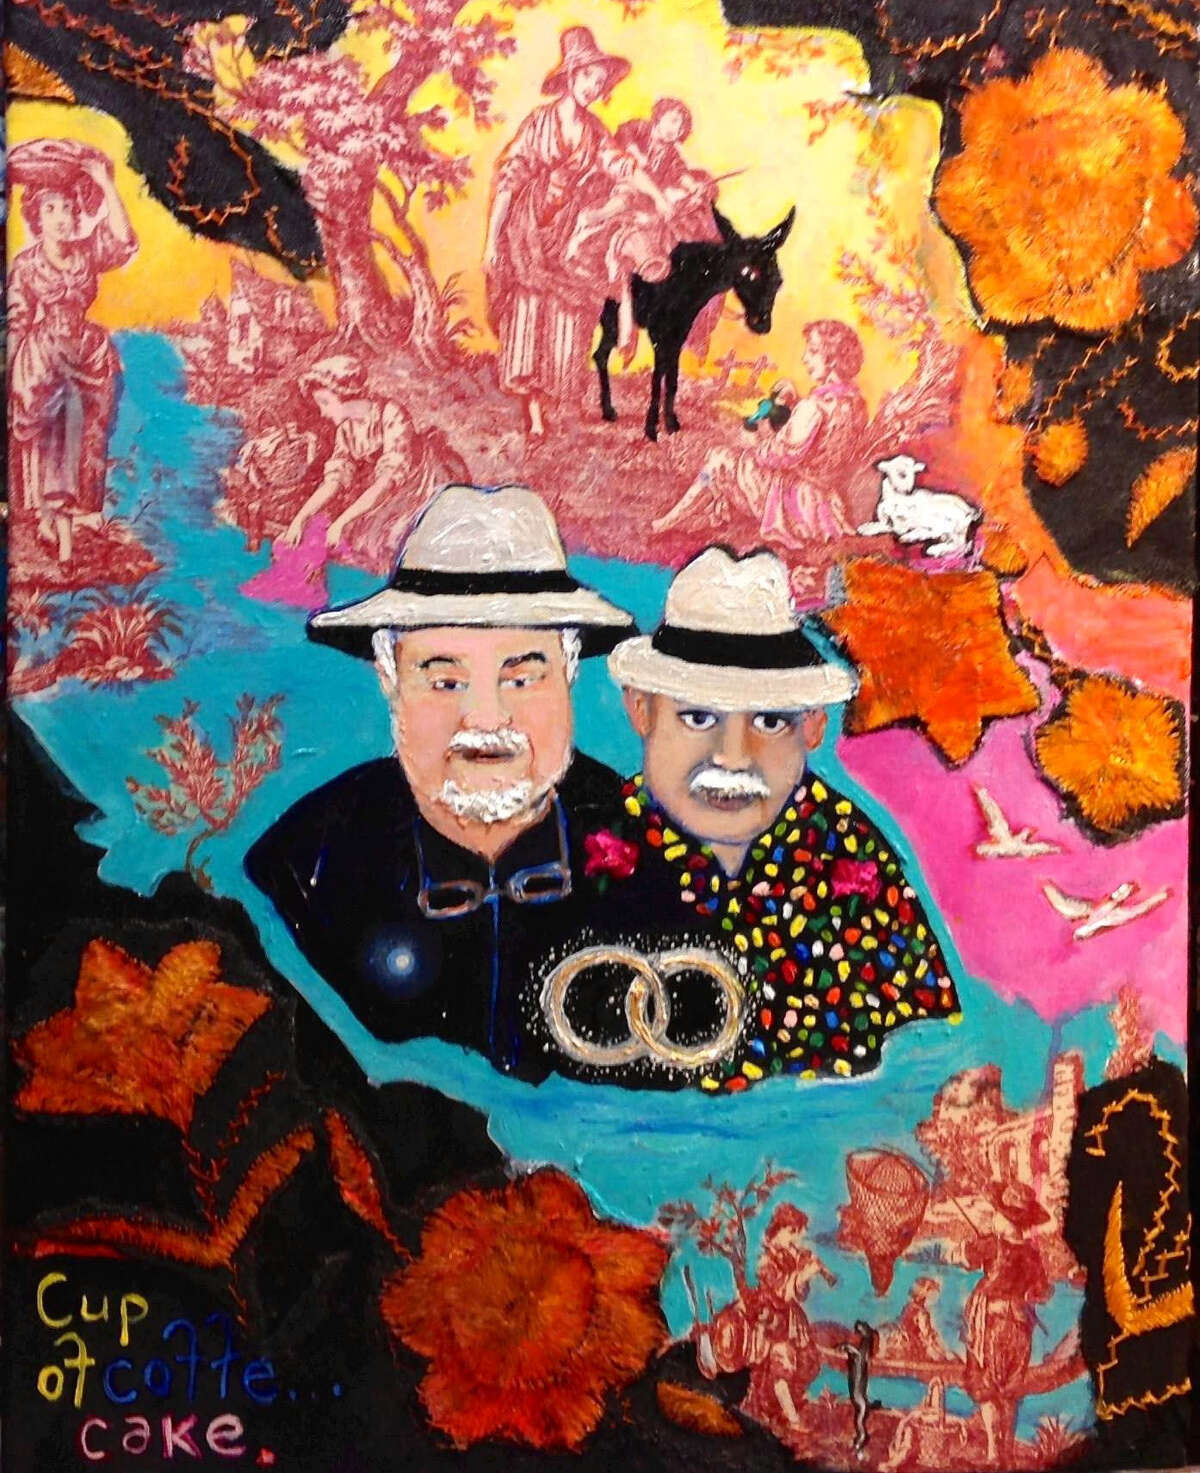 David Zamora Casas, the lead artist in the exhibit “Voces de San Antonio, Tejaztlan” included his acrylic and mixed-media work “Portrait of Toams and Dudley/Cup of Coffee ... Cake.”